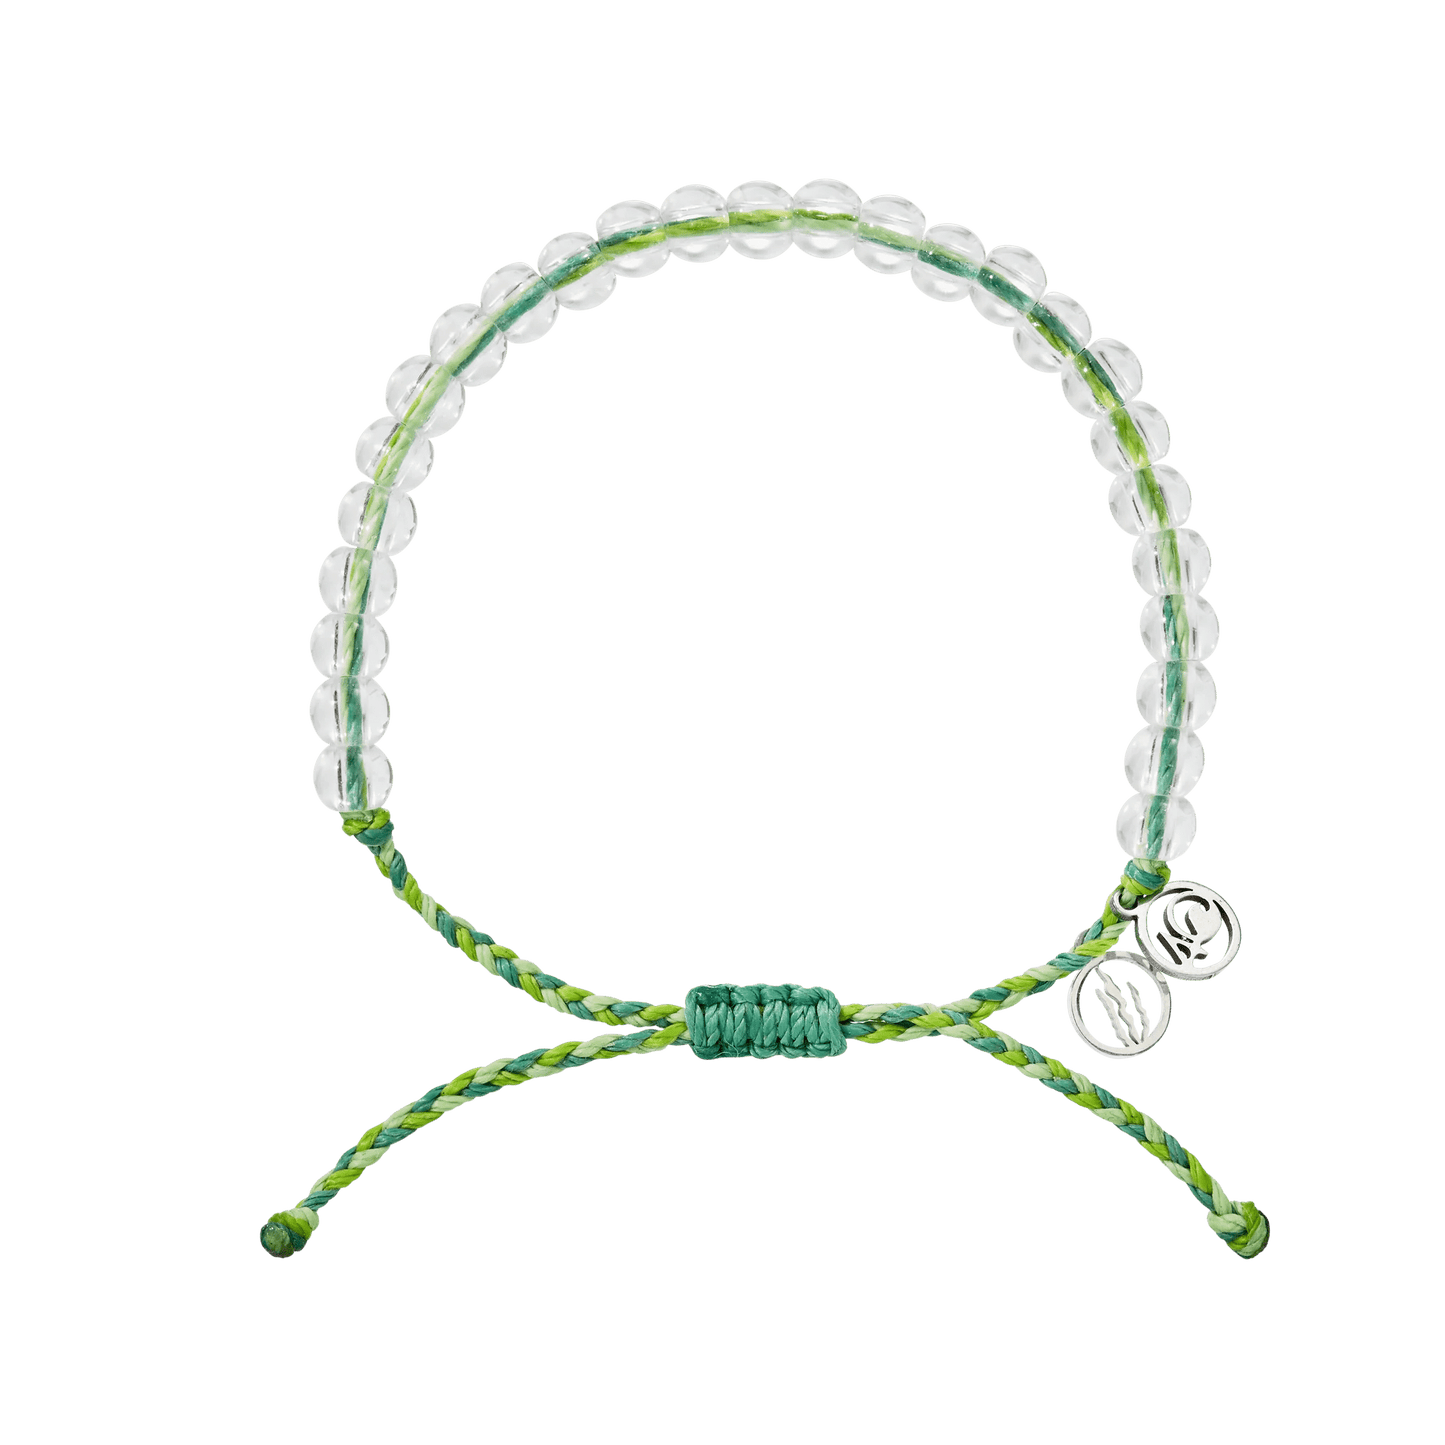 BRC 4 Ocean Recycled Plastic & Glass Bracelet - Kelp Forest Earth Day 2023 Limited Edition